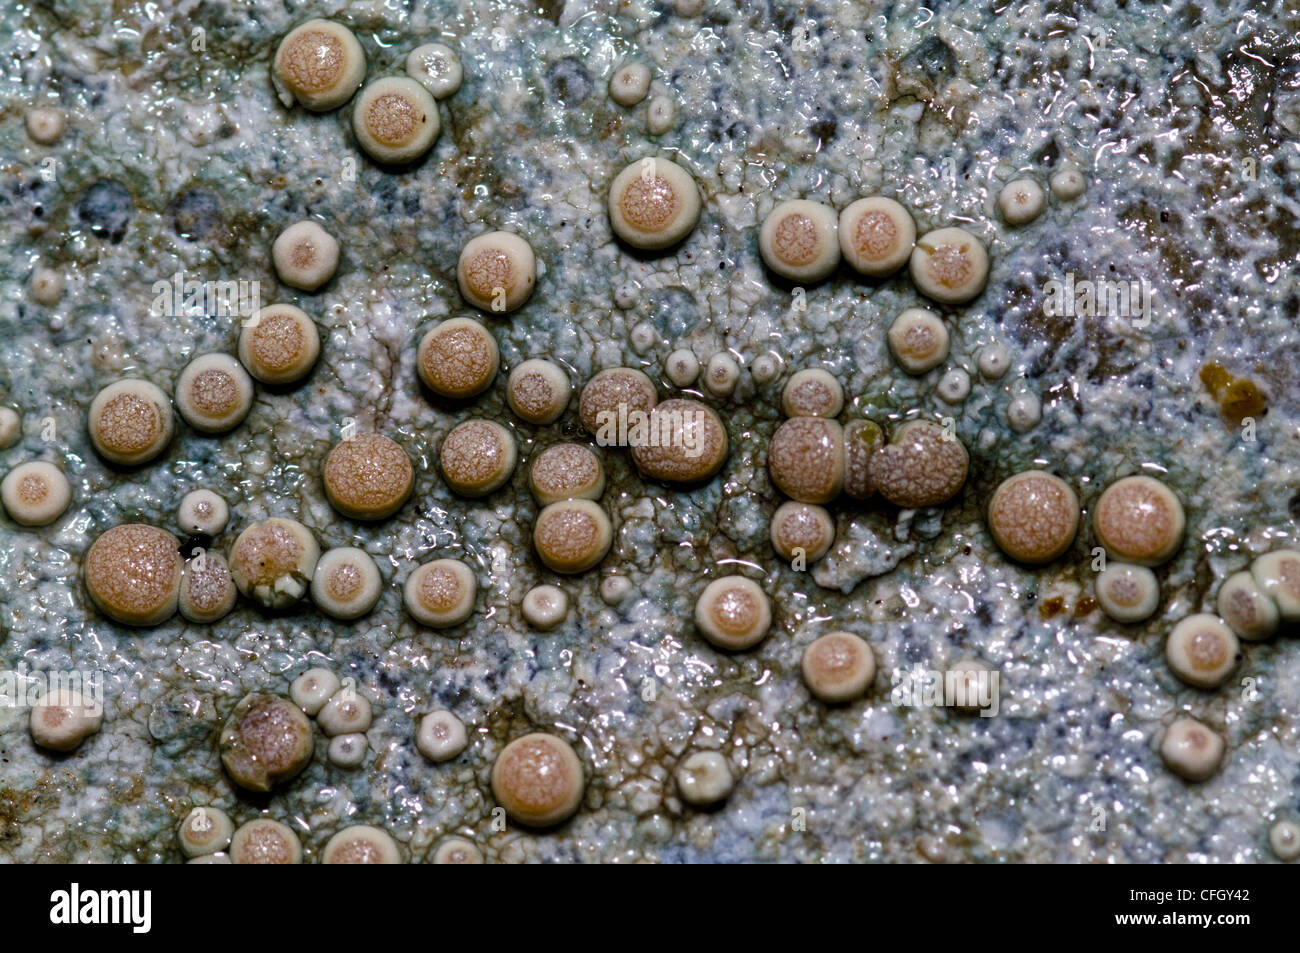 Crustose lichen with apothecia, spore-bearing structures on a boulder. Stock Photo